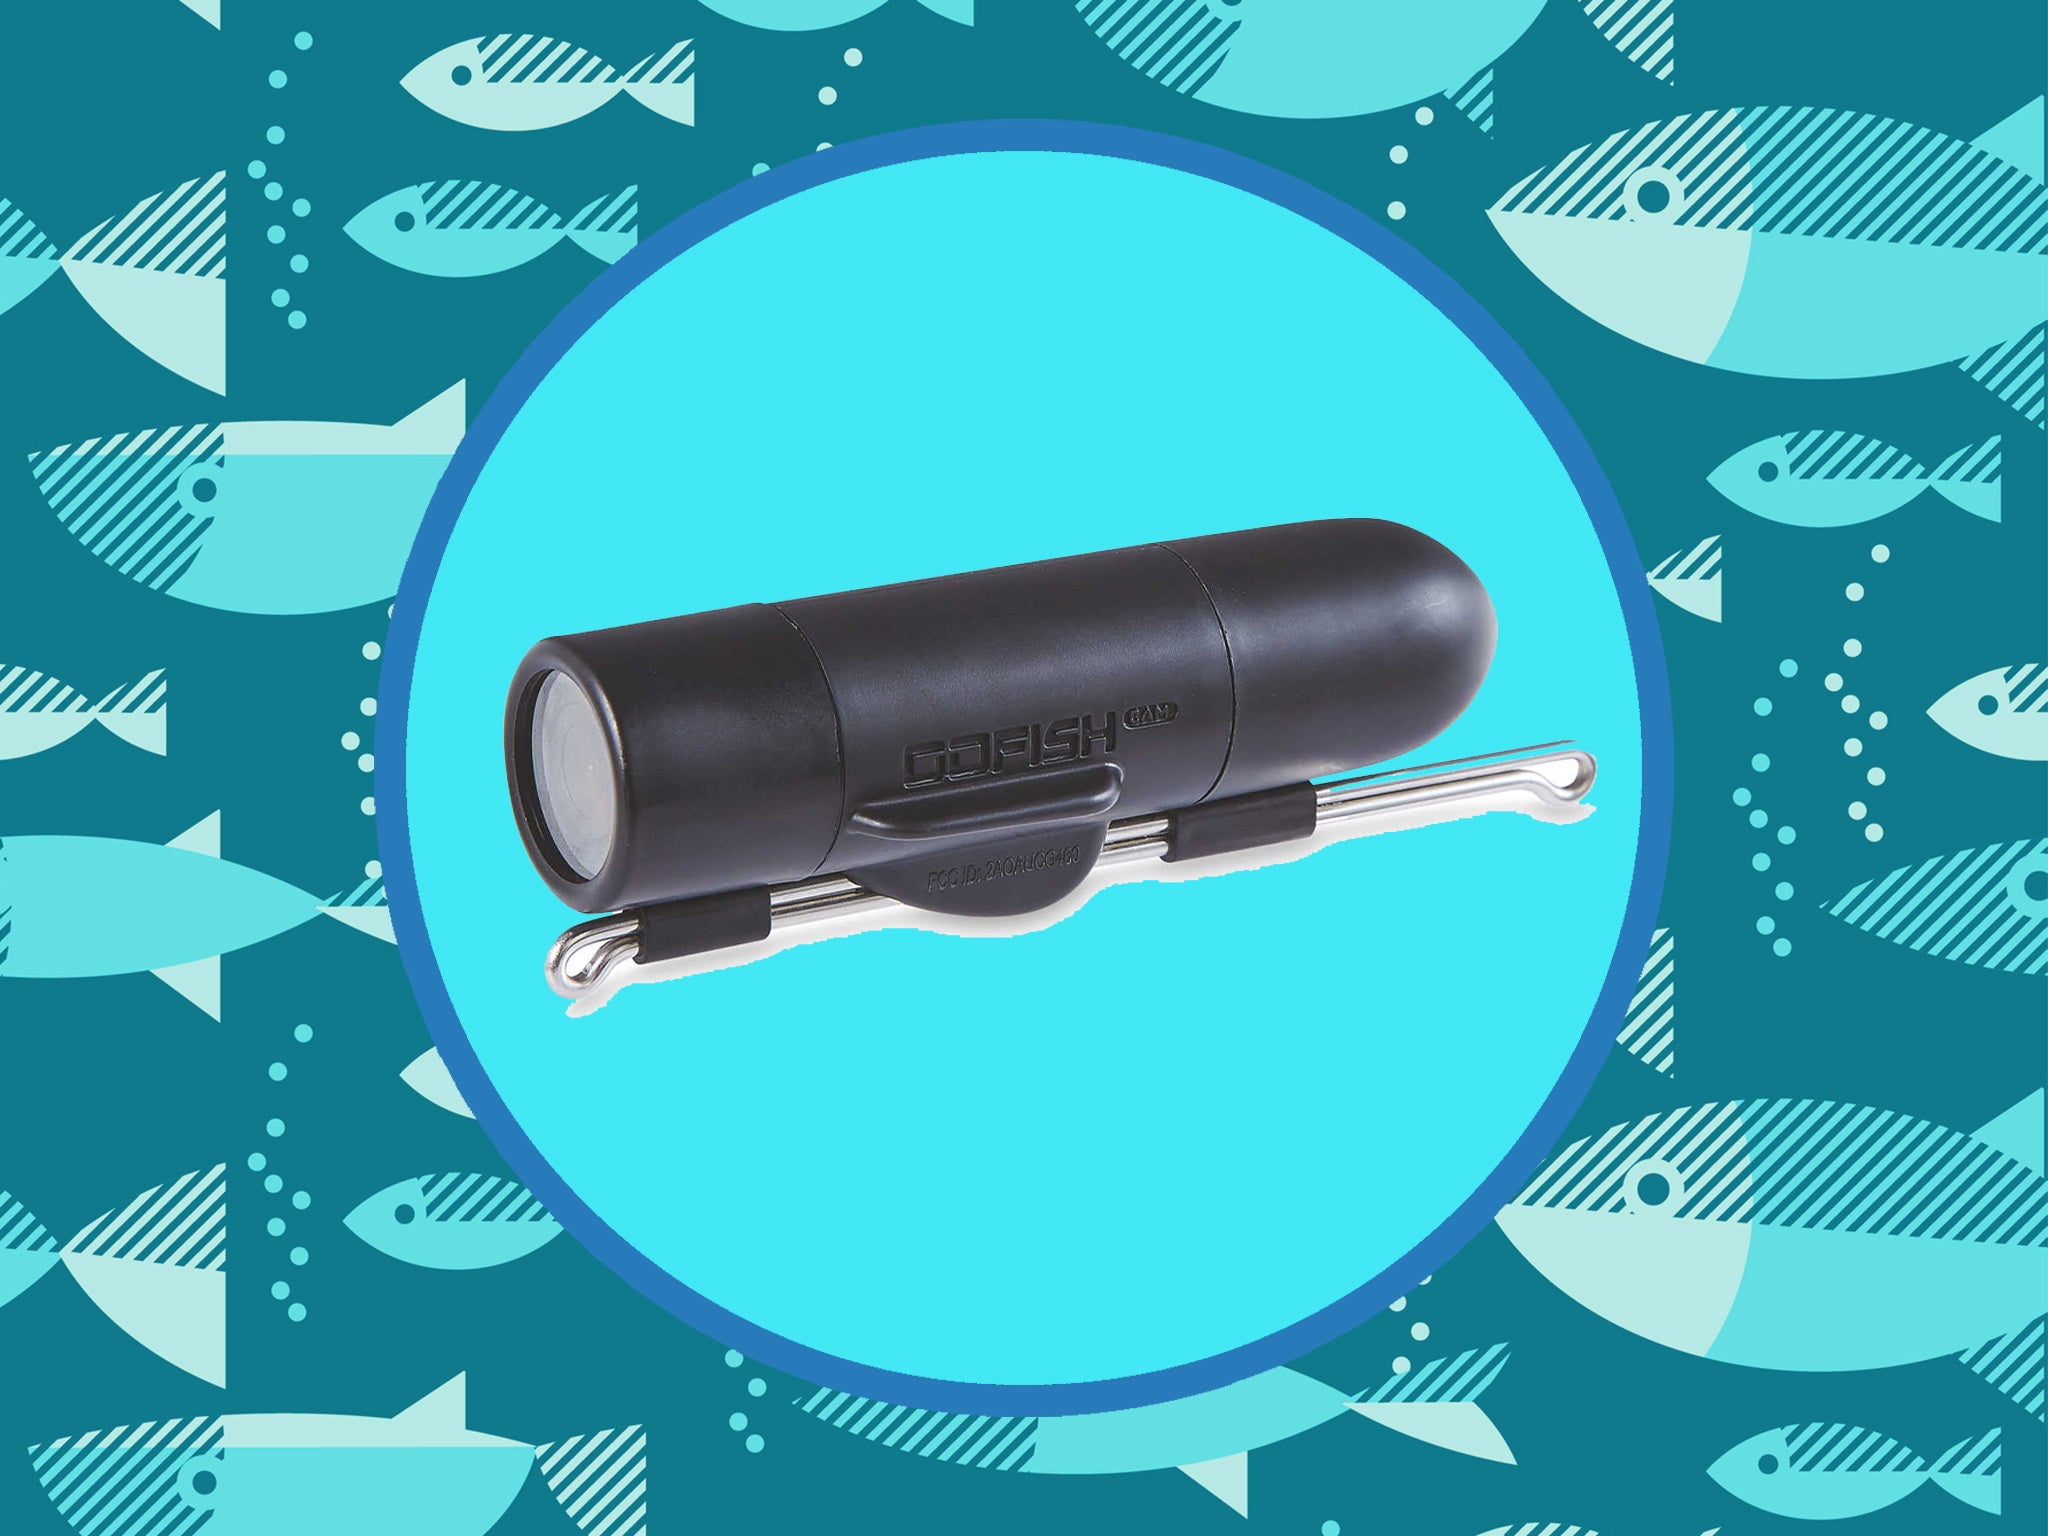 Aldi is now selling the GoFish underwater fishing camera